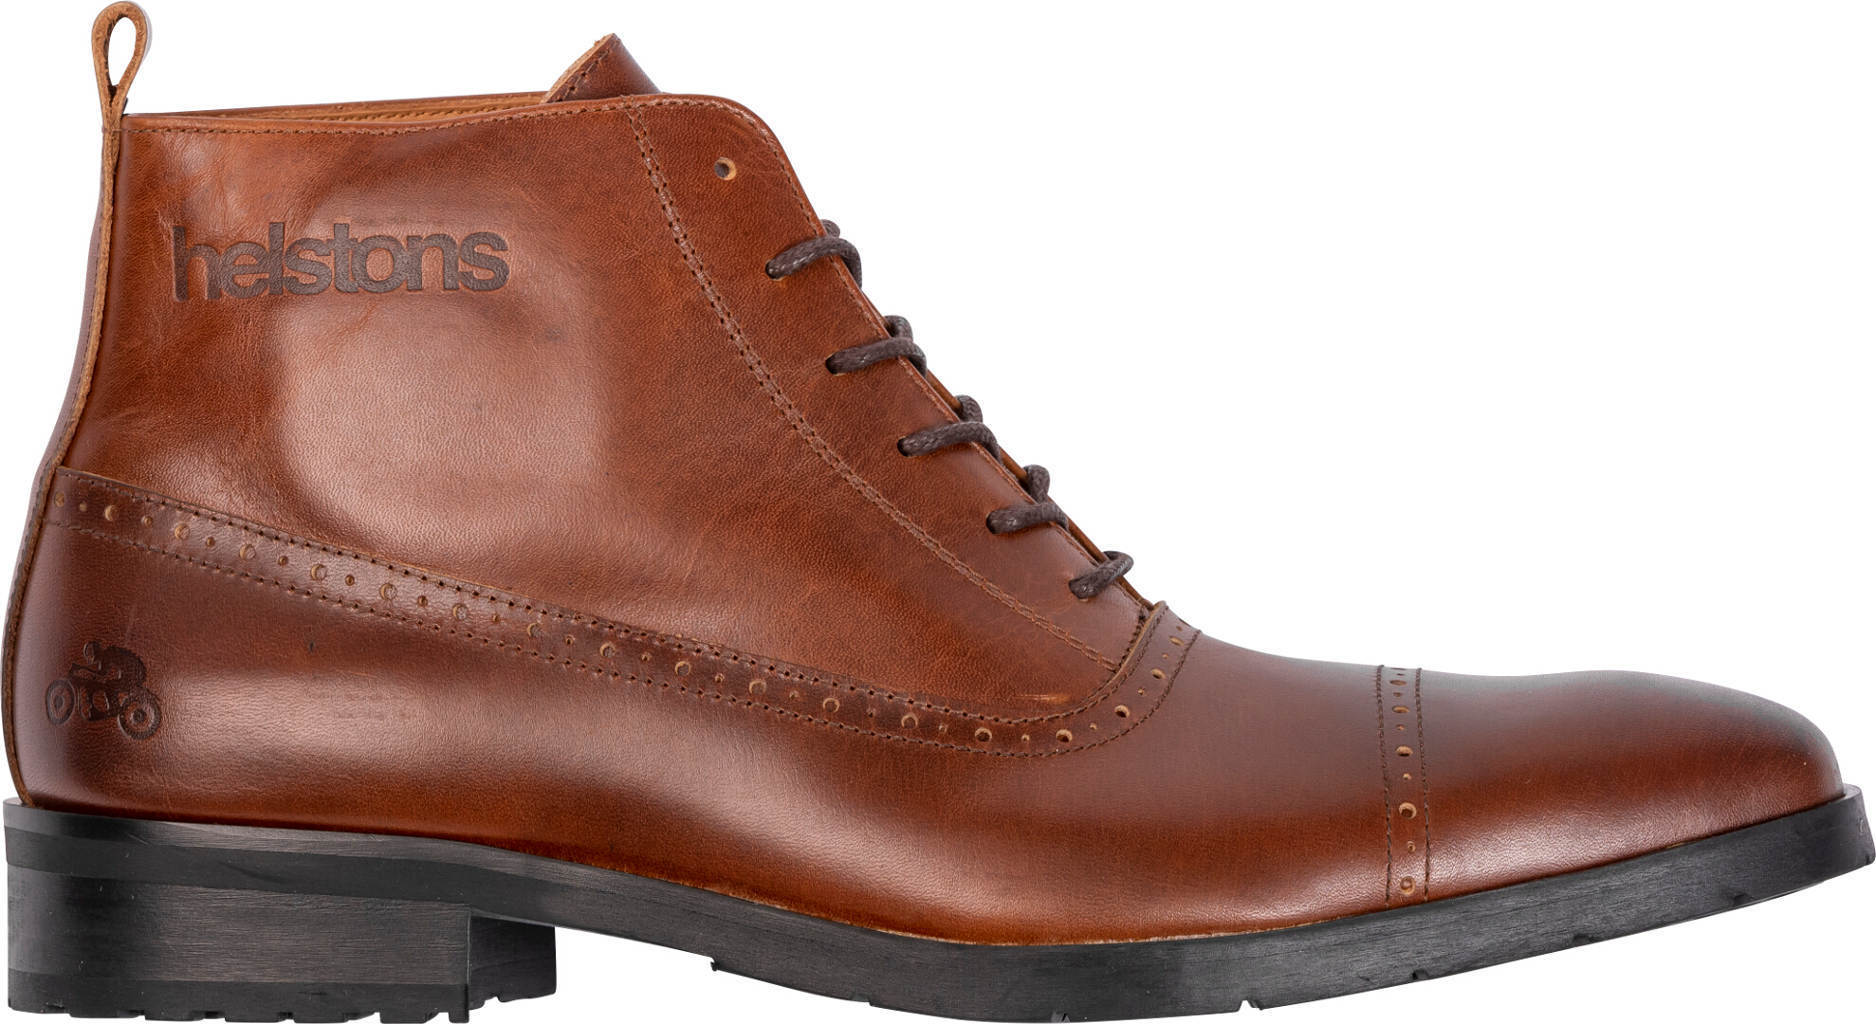 Image of Helstons Heroes Leather Aniline Brown Wax Size 40 ID 3662136082182